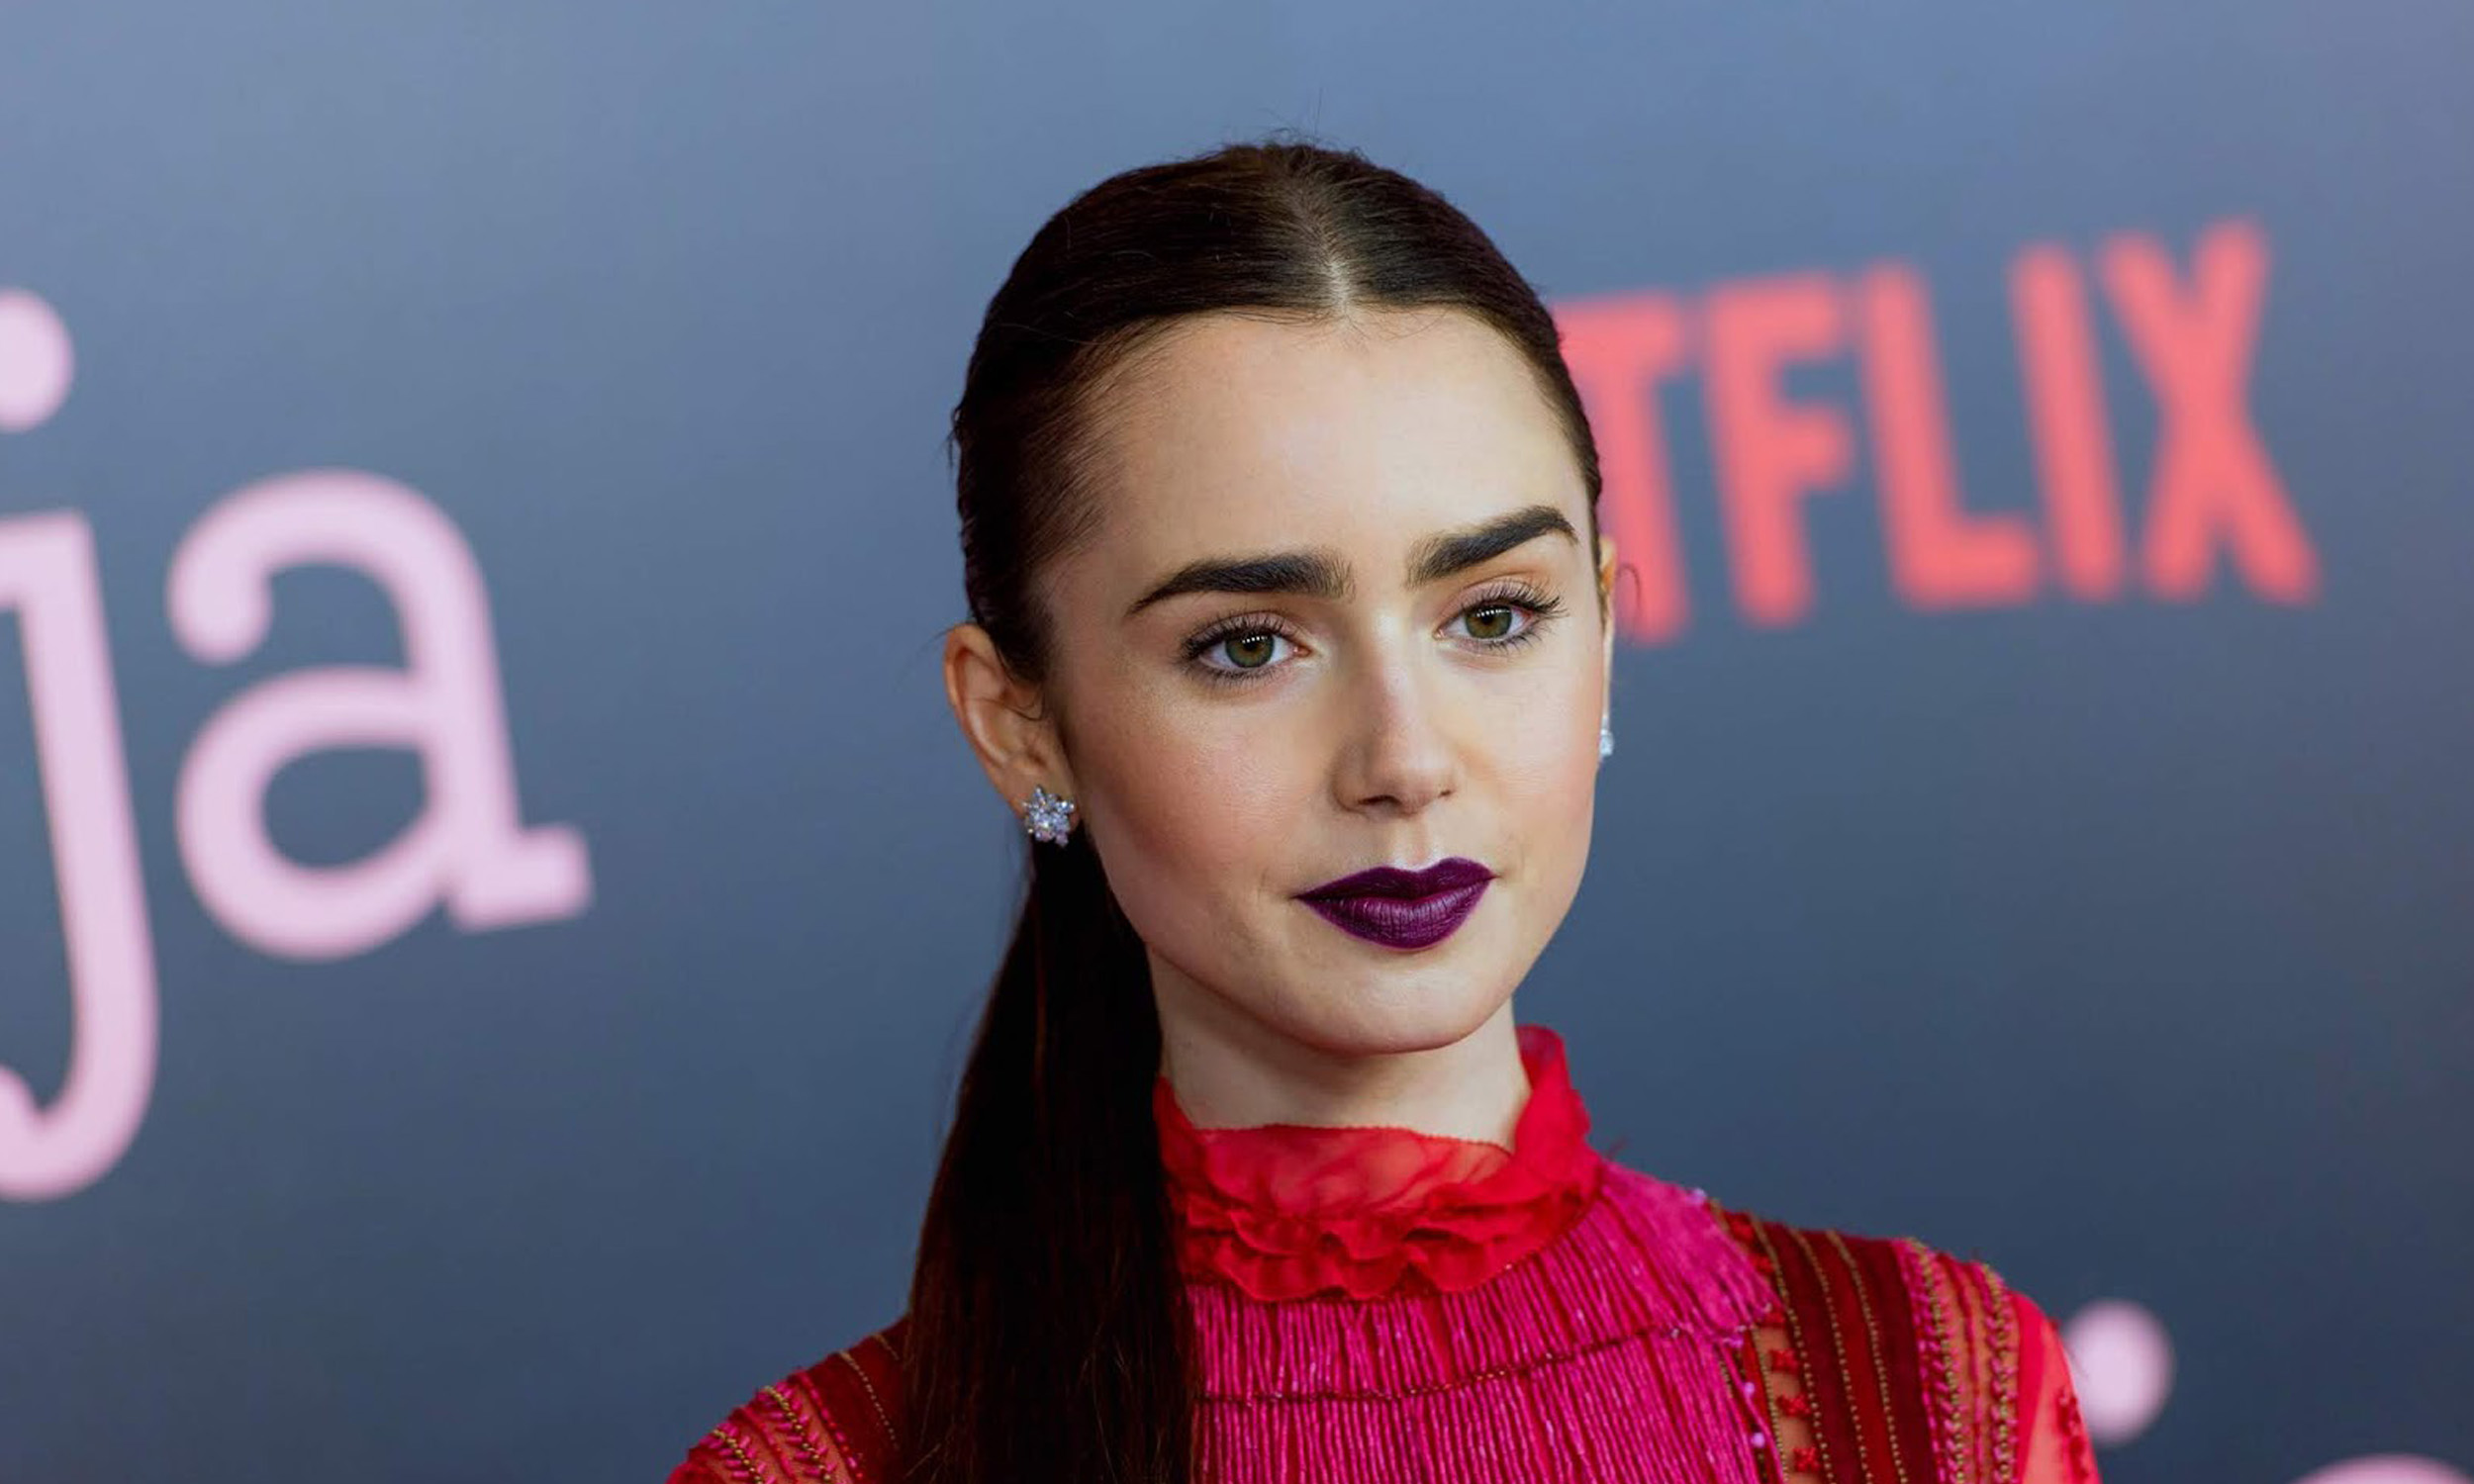 Actress Lily Collins 2019 Wallpapers